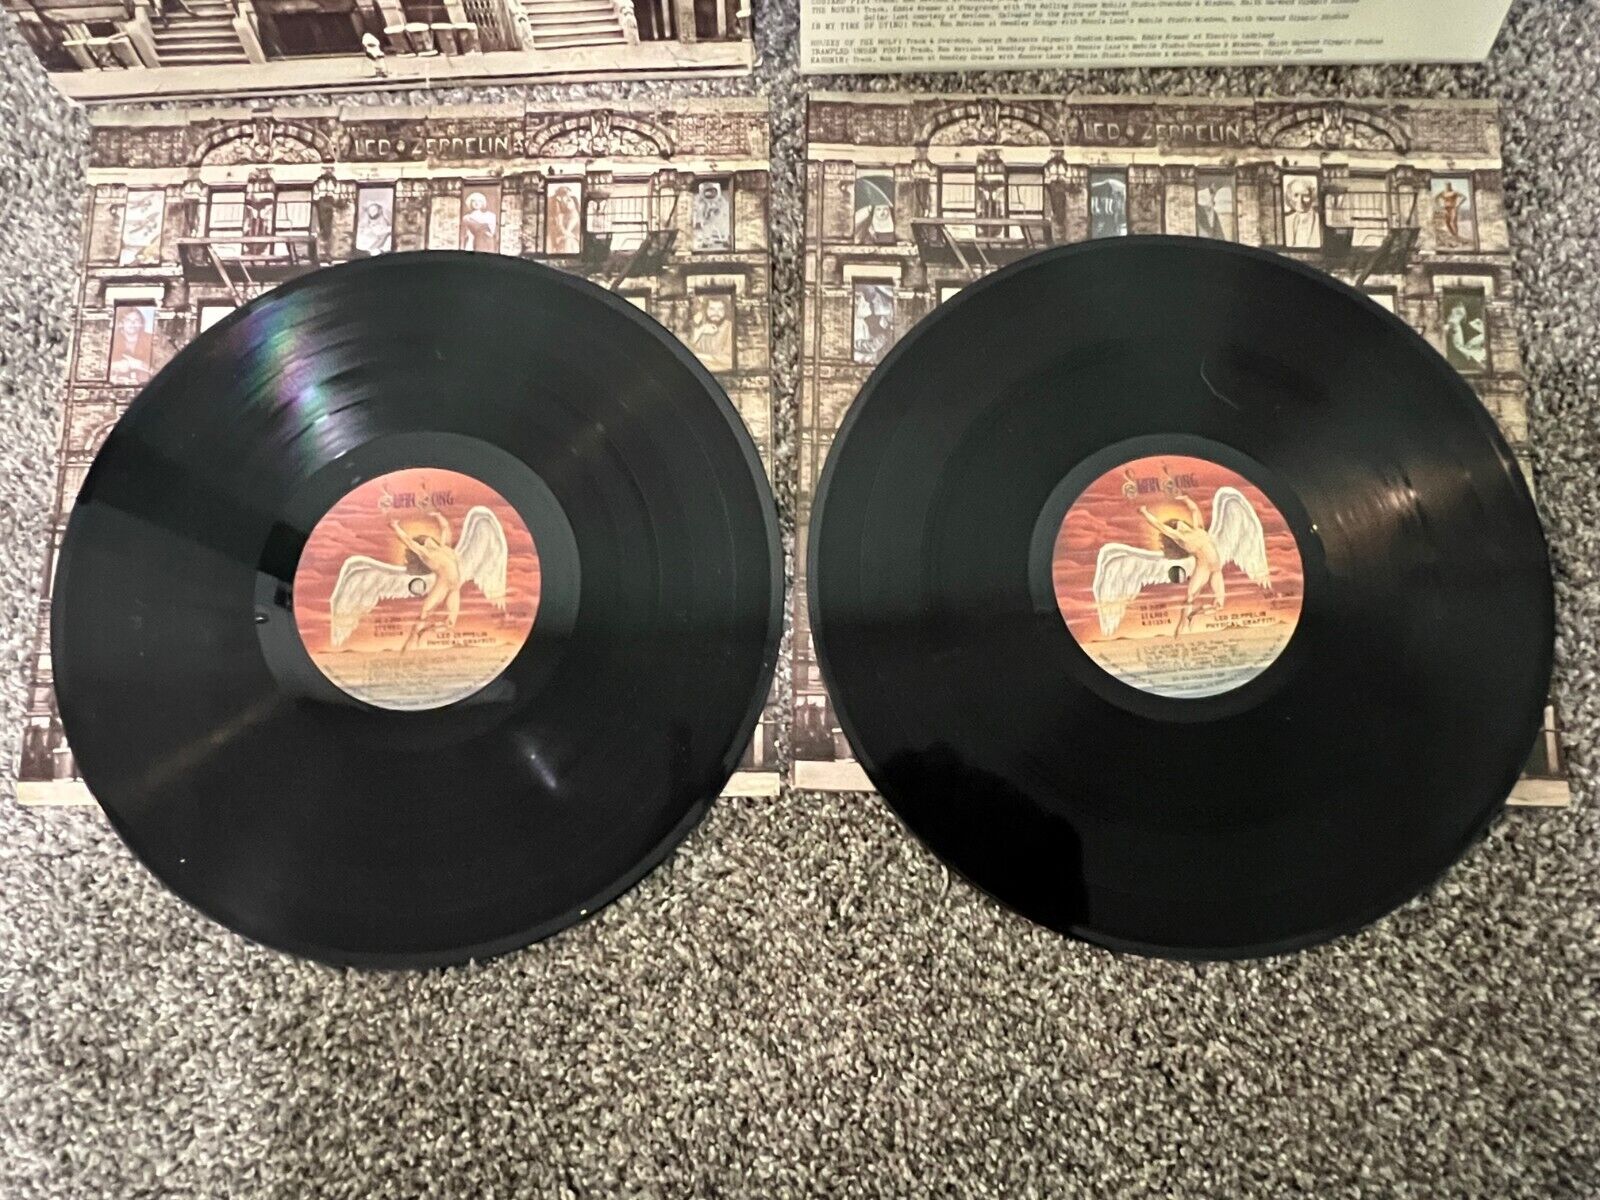 Pic 3 LED ZEPPELIN - 3 Vinyl LPs Presence Physical Graffiti Song Remains the Same